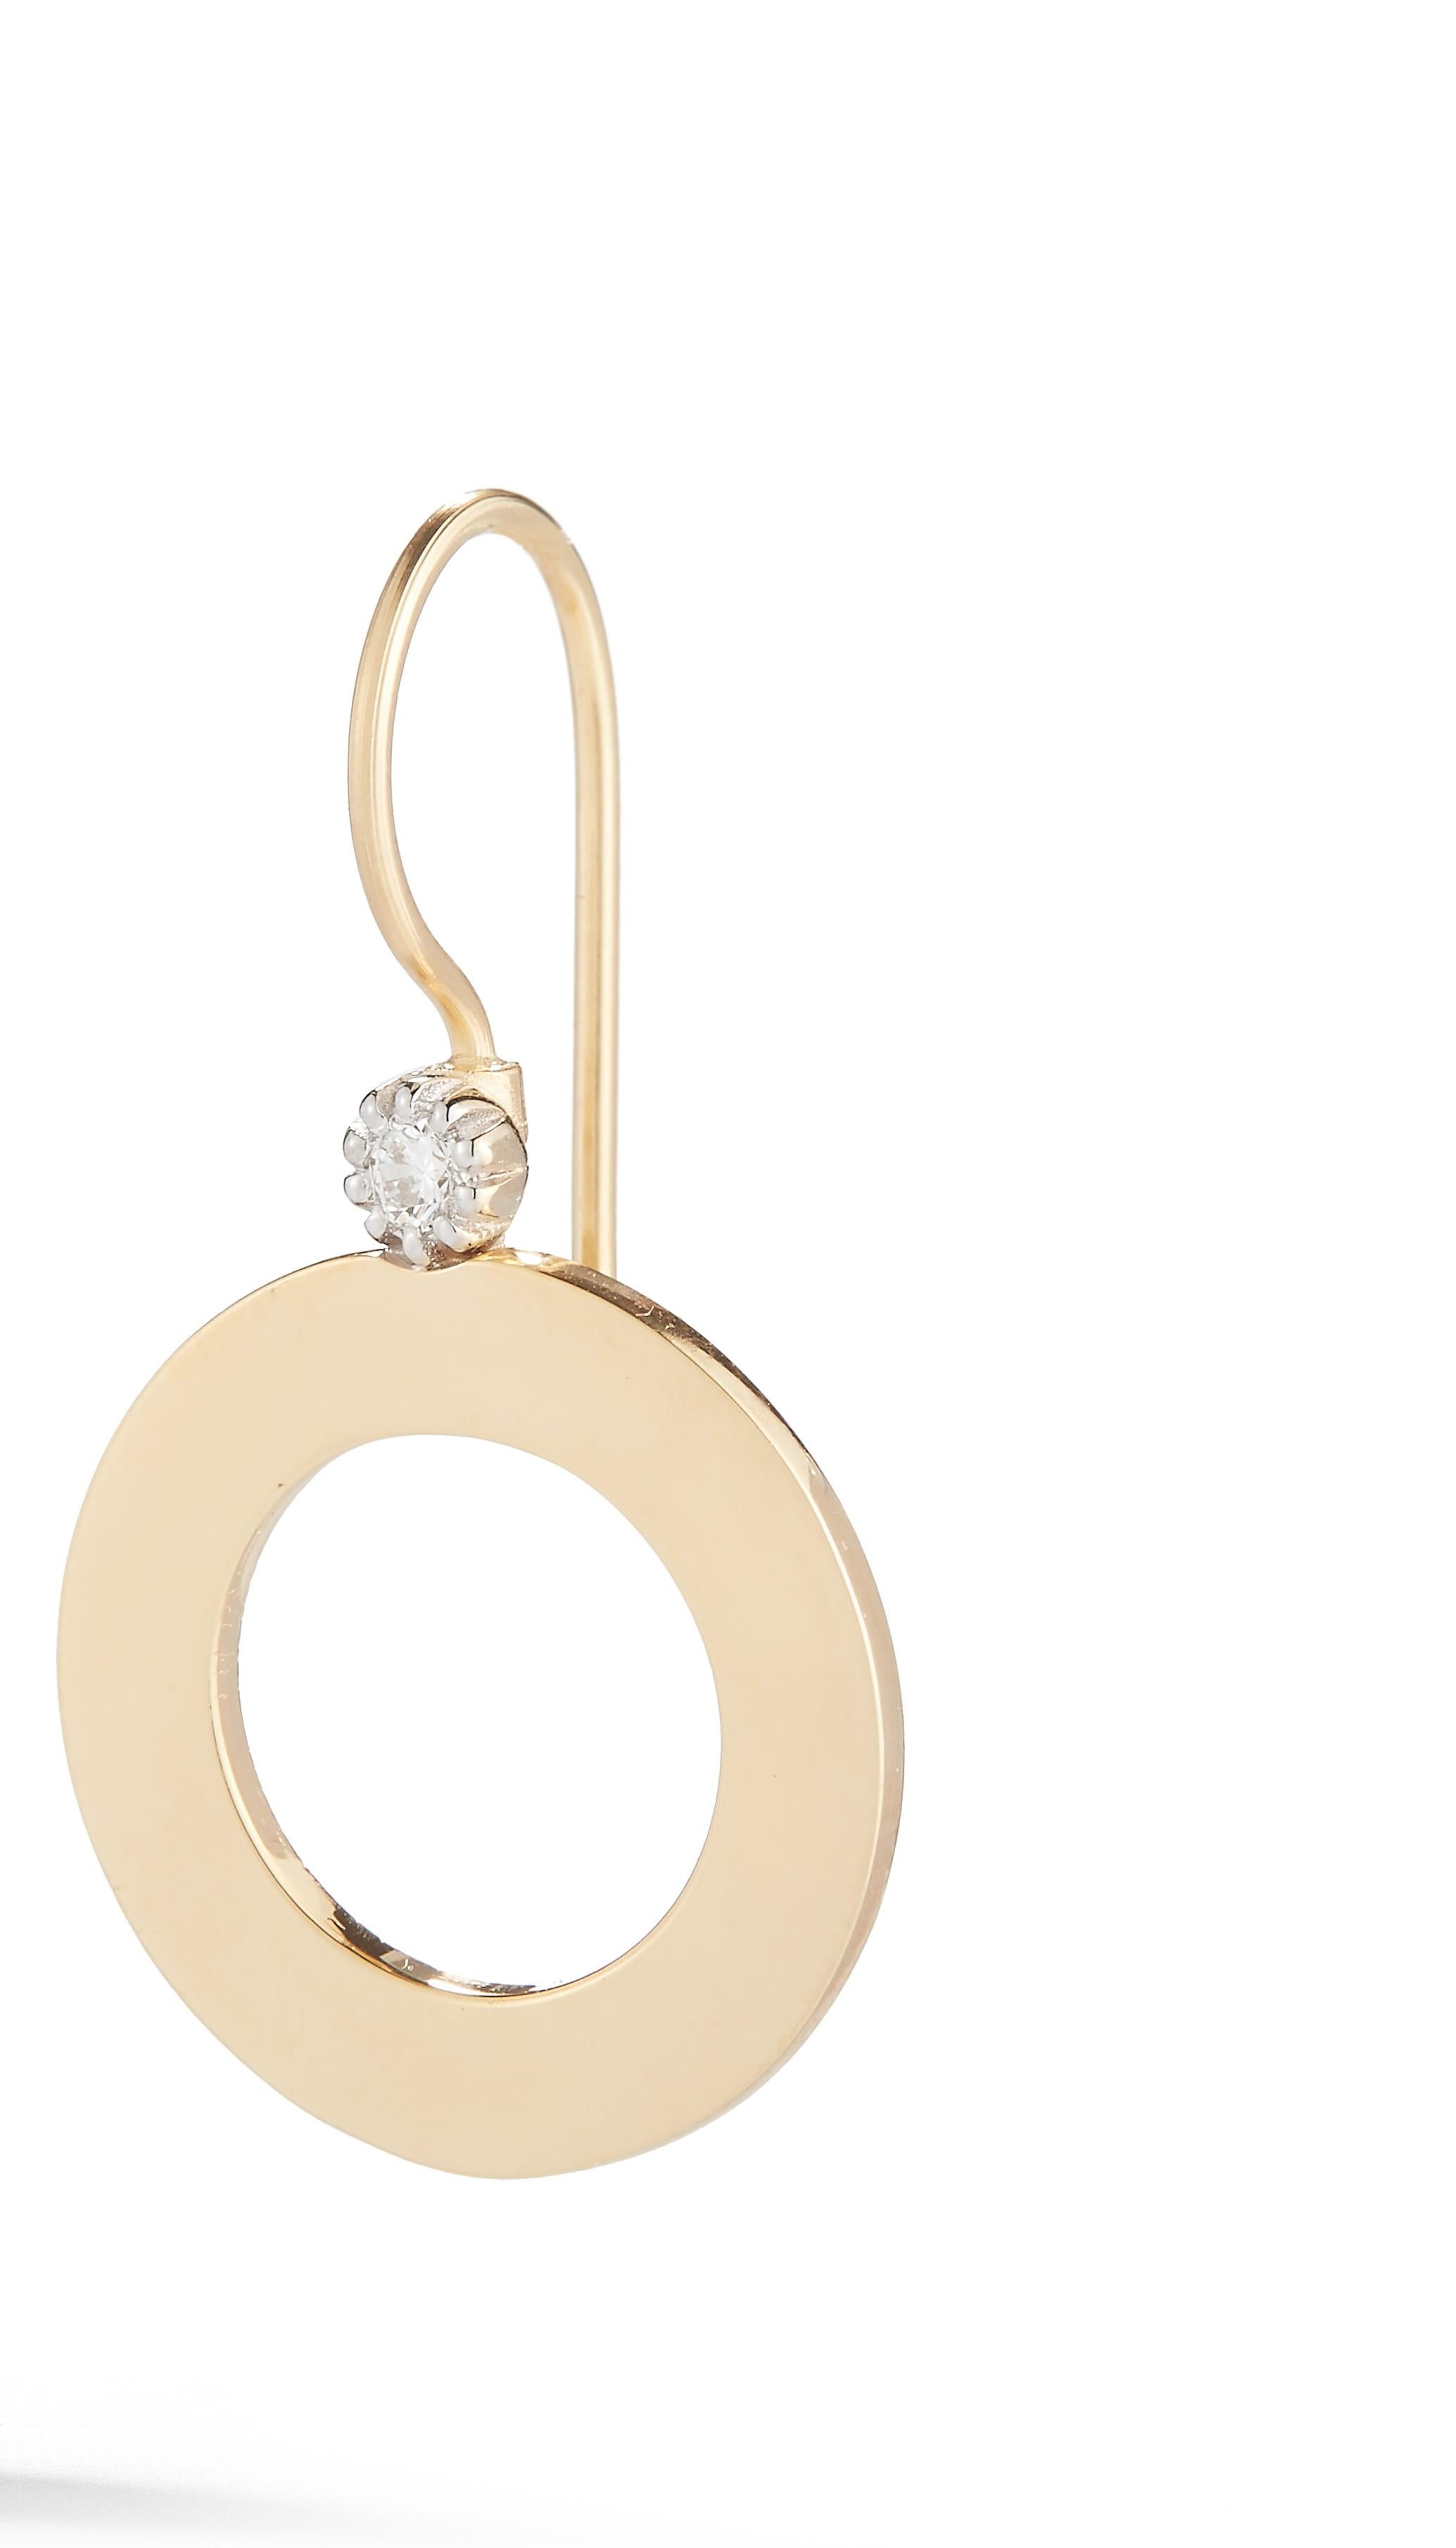 14 Karat Yellow Gold Hand-Crafted Polish-Finished Open Circle Drop Earrings, Accented with 0.10 Carats of Prong Diamonds and Set on a French Hook Closure.
